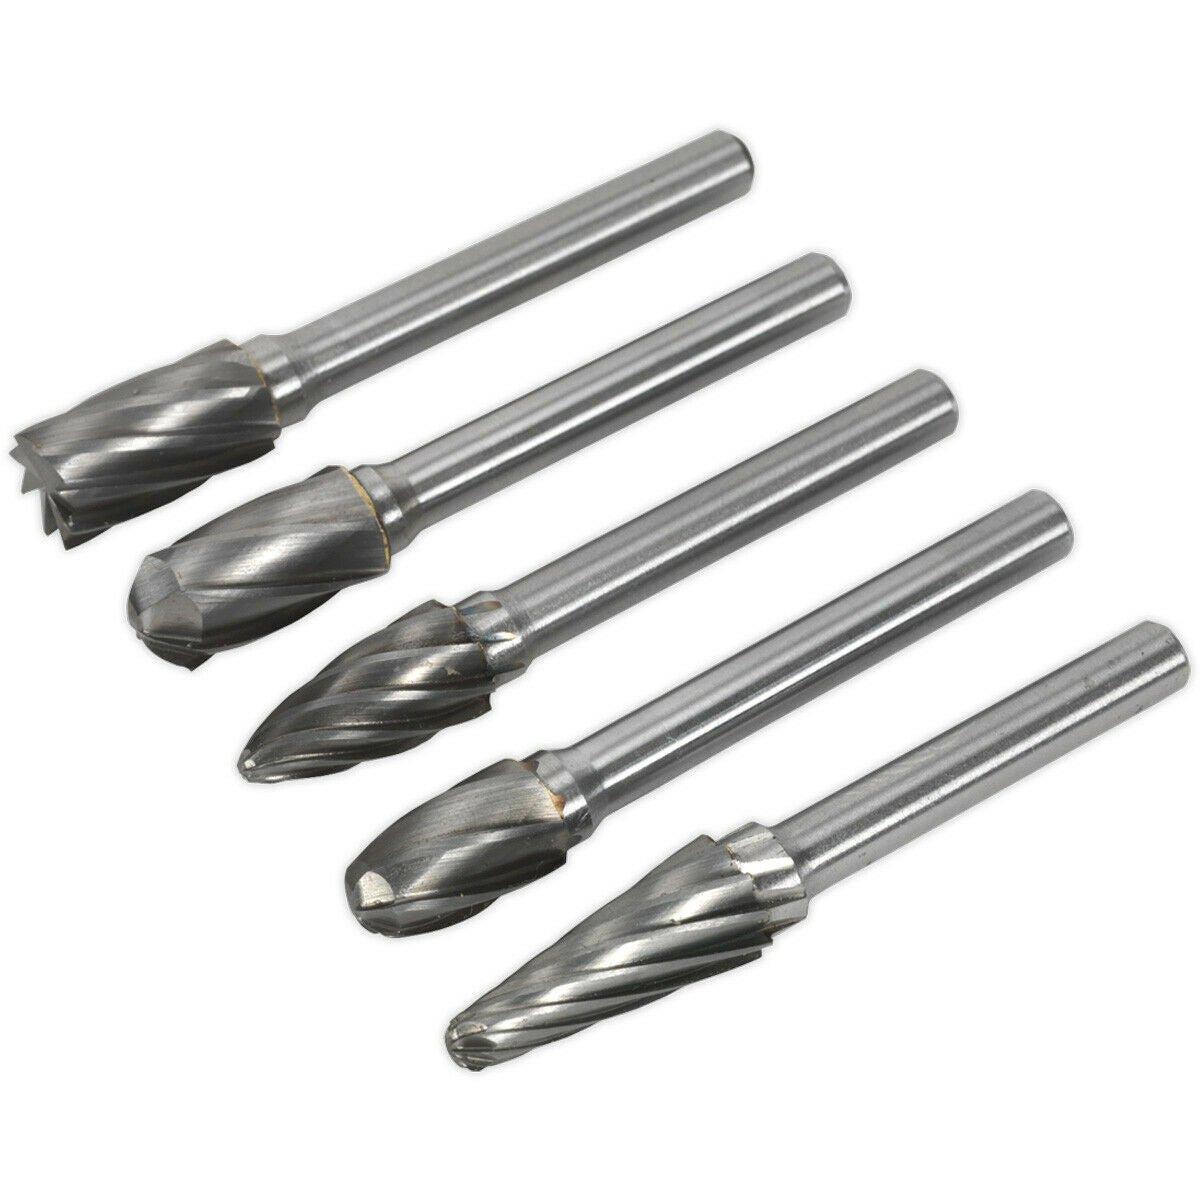 5 PACK - 10mm Tungsten Carbide Rotary Burr Bits Set - VARIOUS RIPPER / COARSE